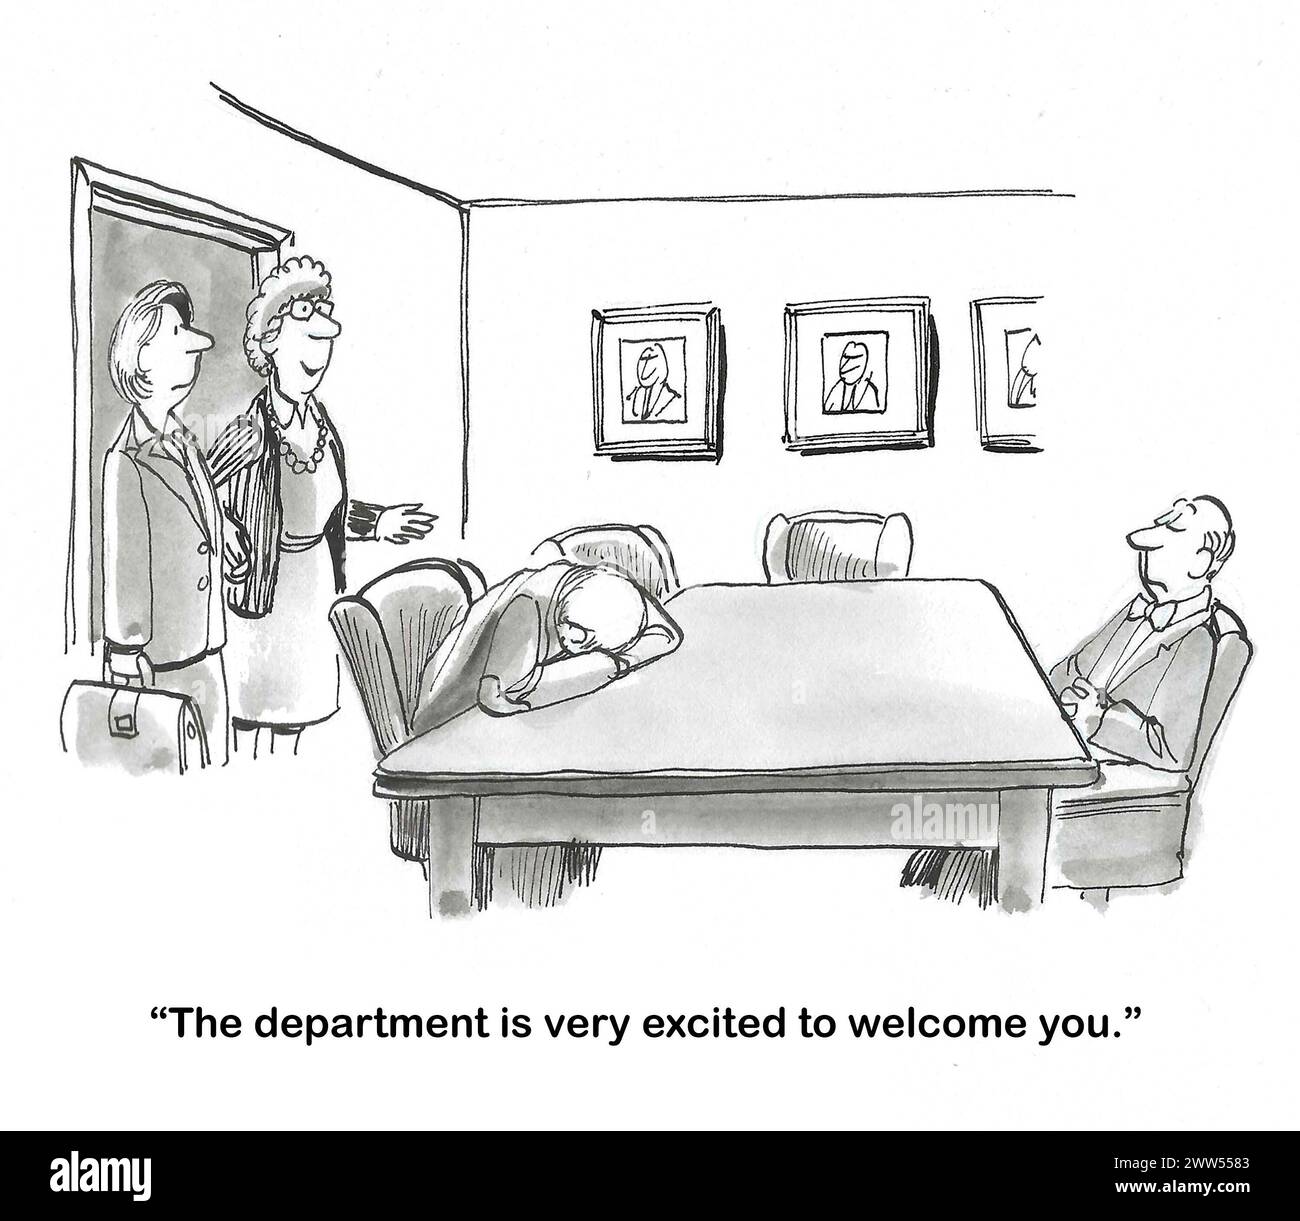 BW cartoons of a department treating the new employee rudely. Stock Photo